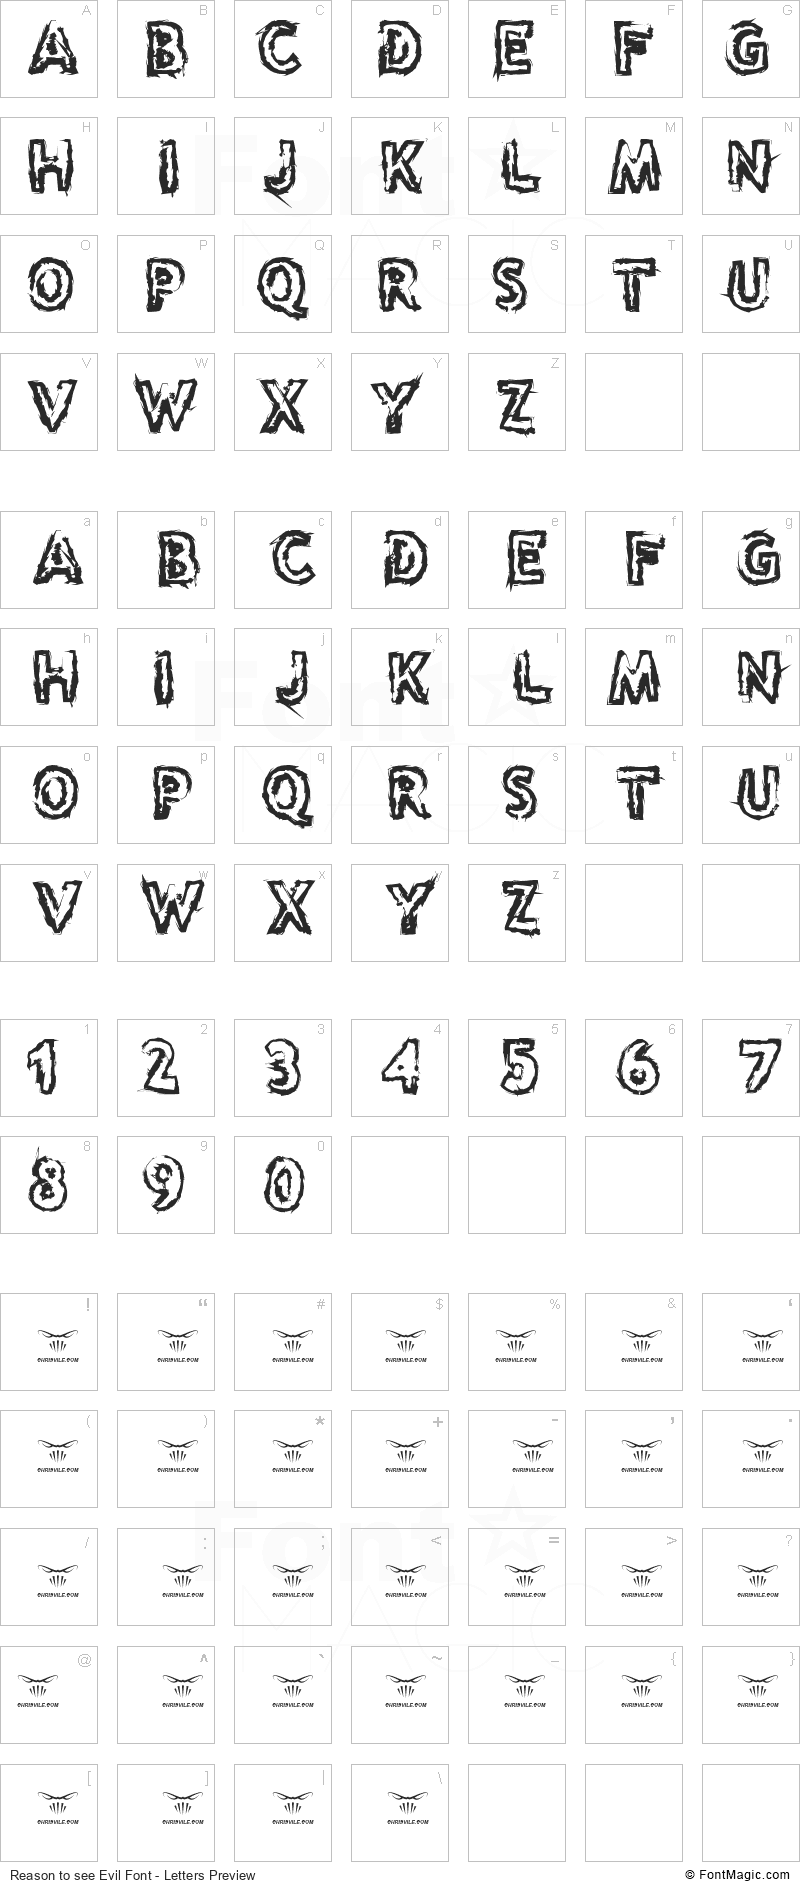 Reason to see Evil Font - All Latters Preview Chart